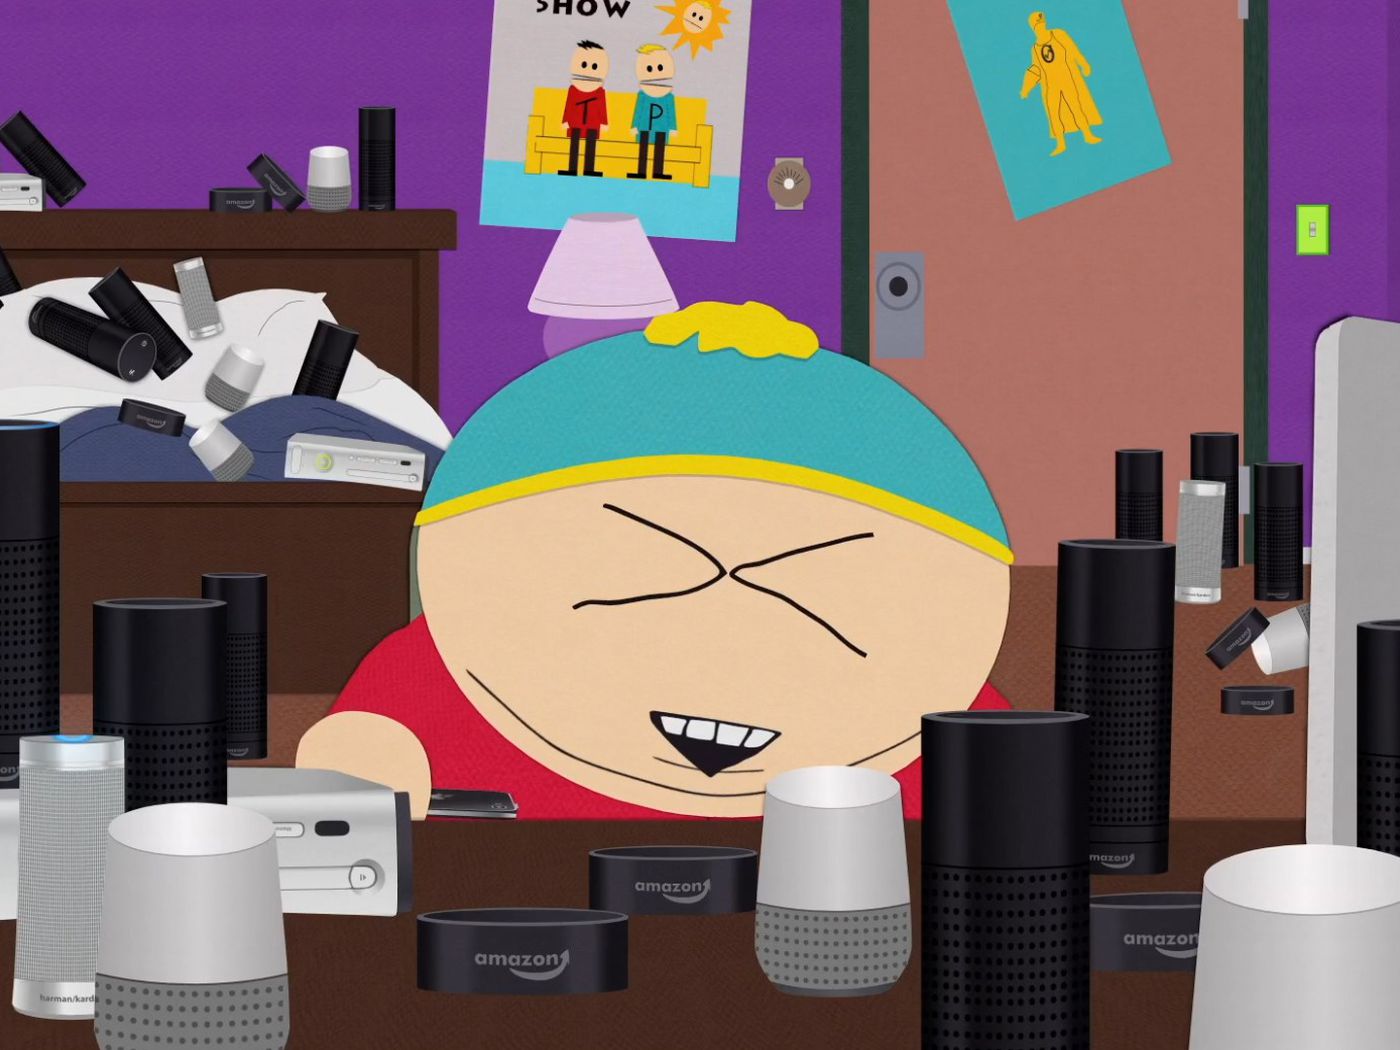 South Park Amazon Alexa owners in this episode - The Verge